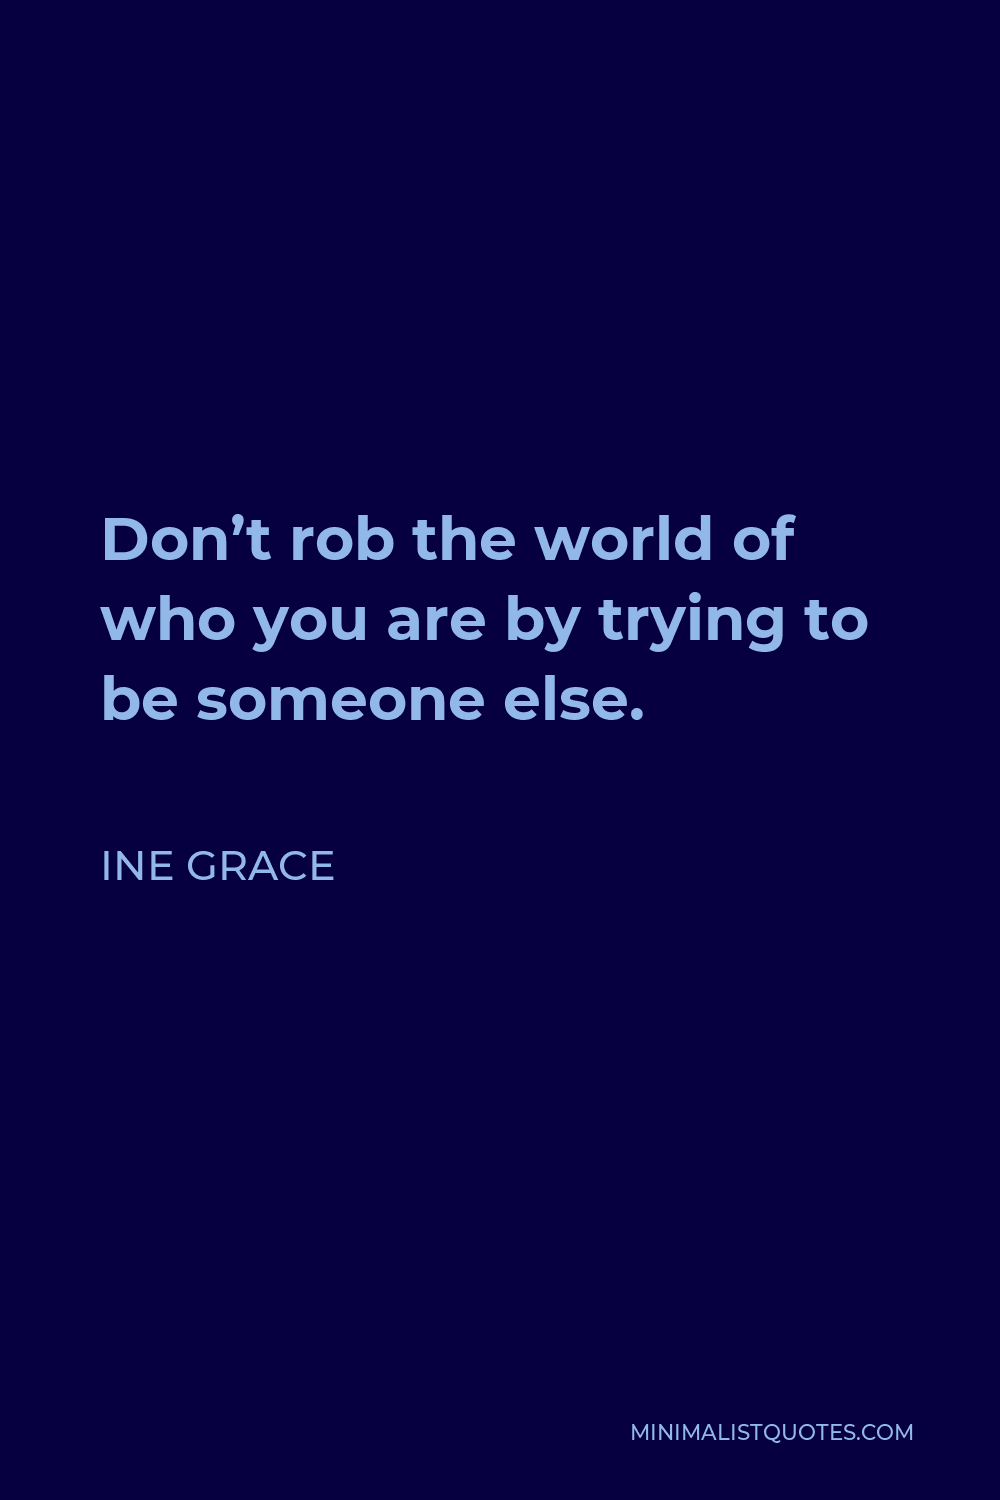 Ine Grace Quote - Don’t rob the world of who you are by trying to be someone else.